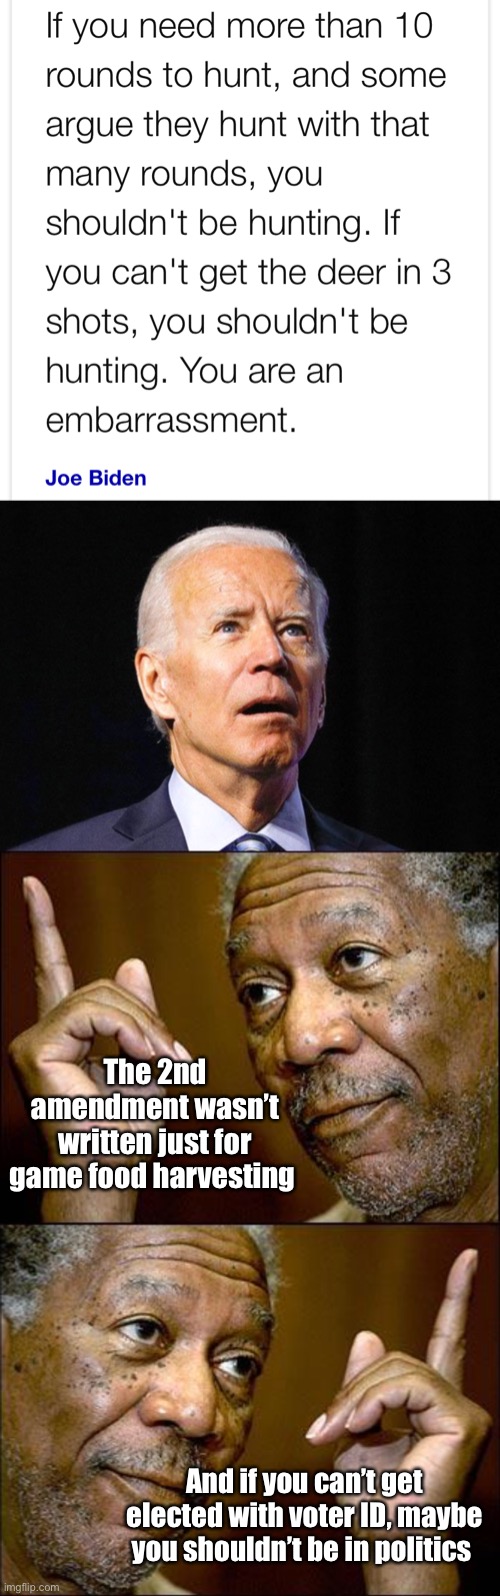 Confused Joe | The 2nd amendment wasn’t written just for game food harvesting; And if you can’t get elected with voter ID, maybe you shouldn’t be in politics | image tagged in joe biden,this morgan freeman,memes,politics lol,politicians suck,derp | made w/ Imgflip meme maker